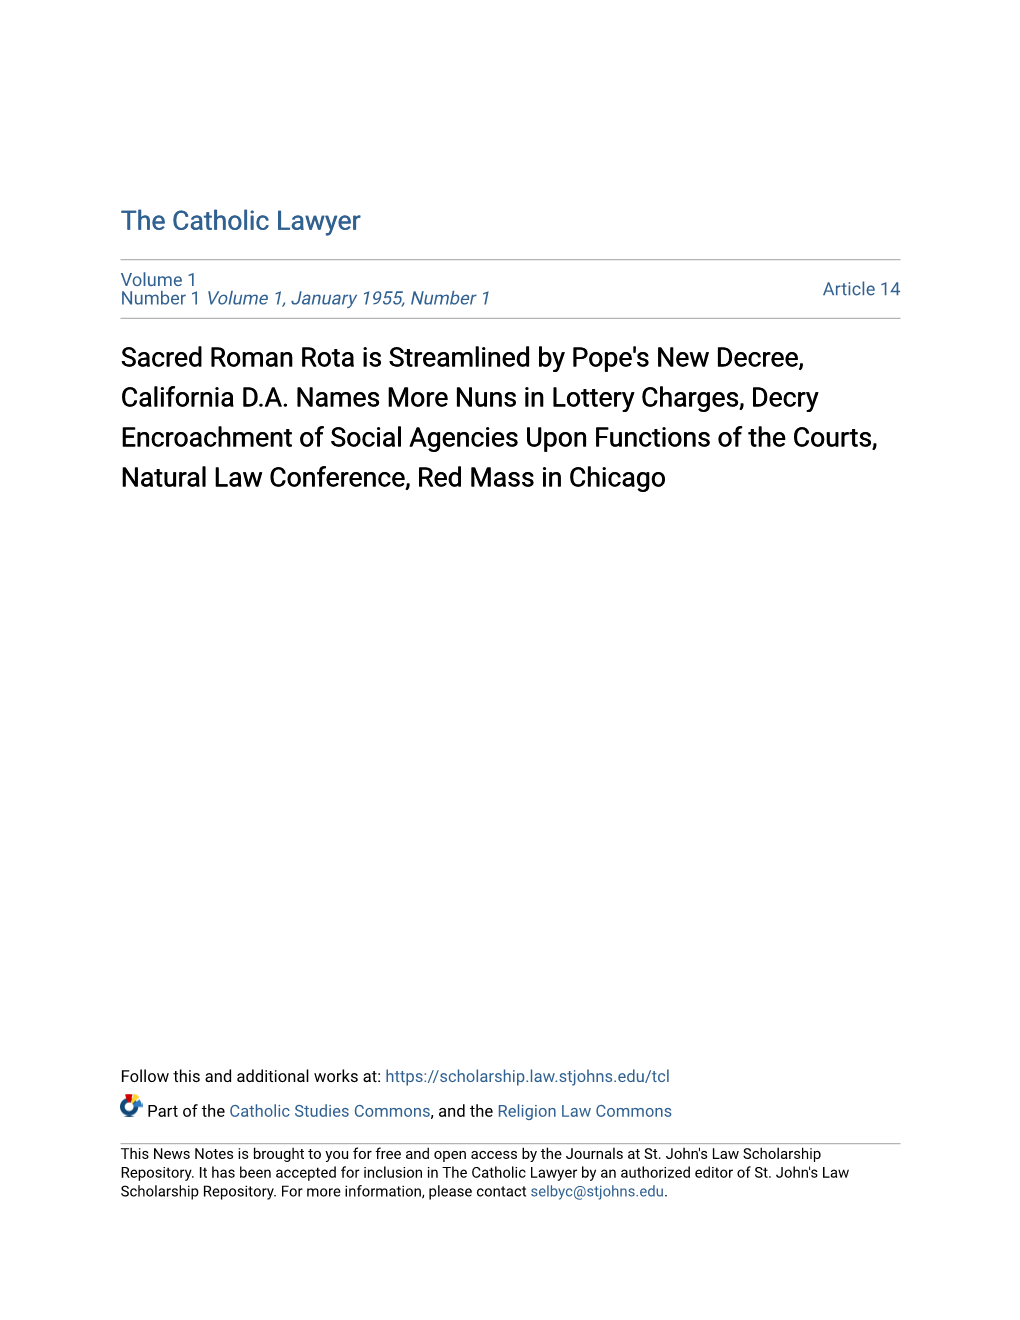 Sacred Roman Rota Is Streamlined by Pope's New Decree, California D.A